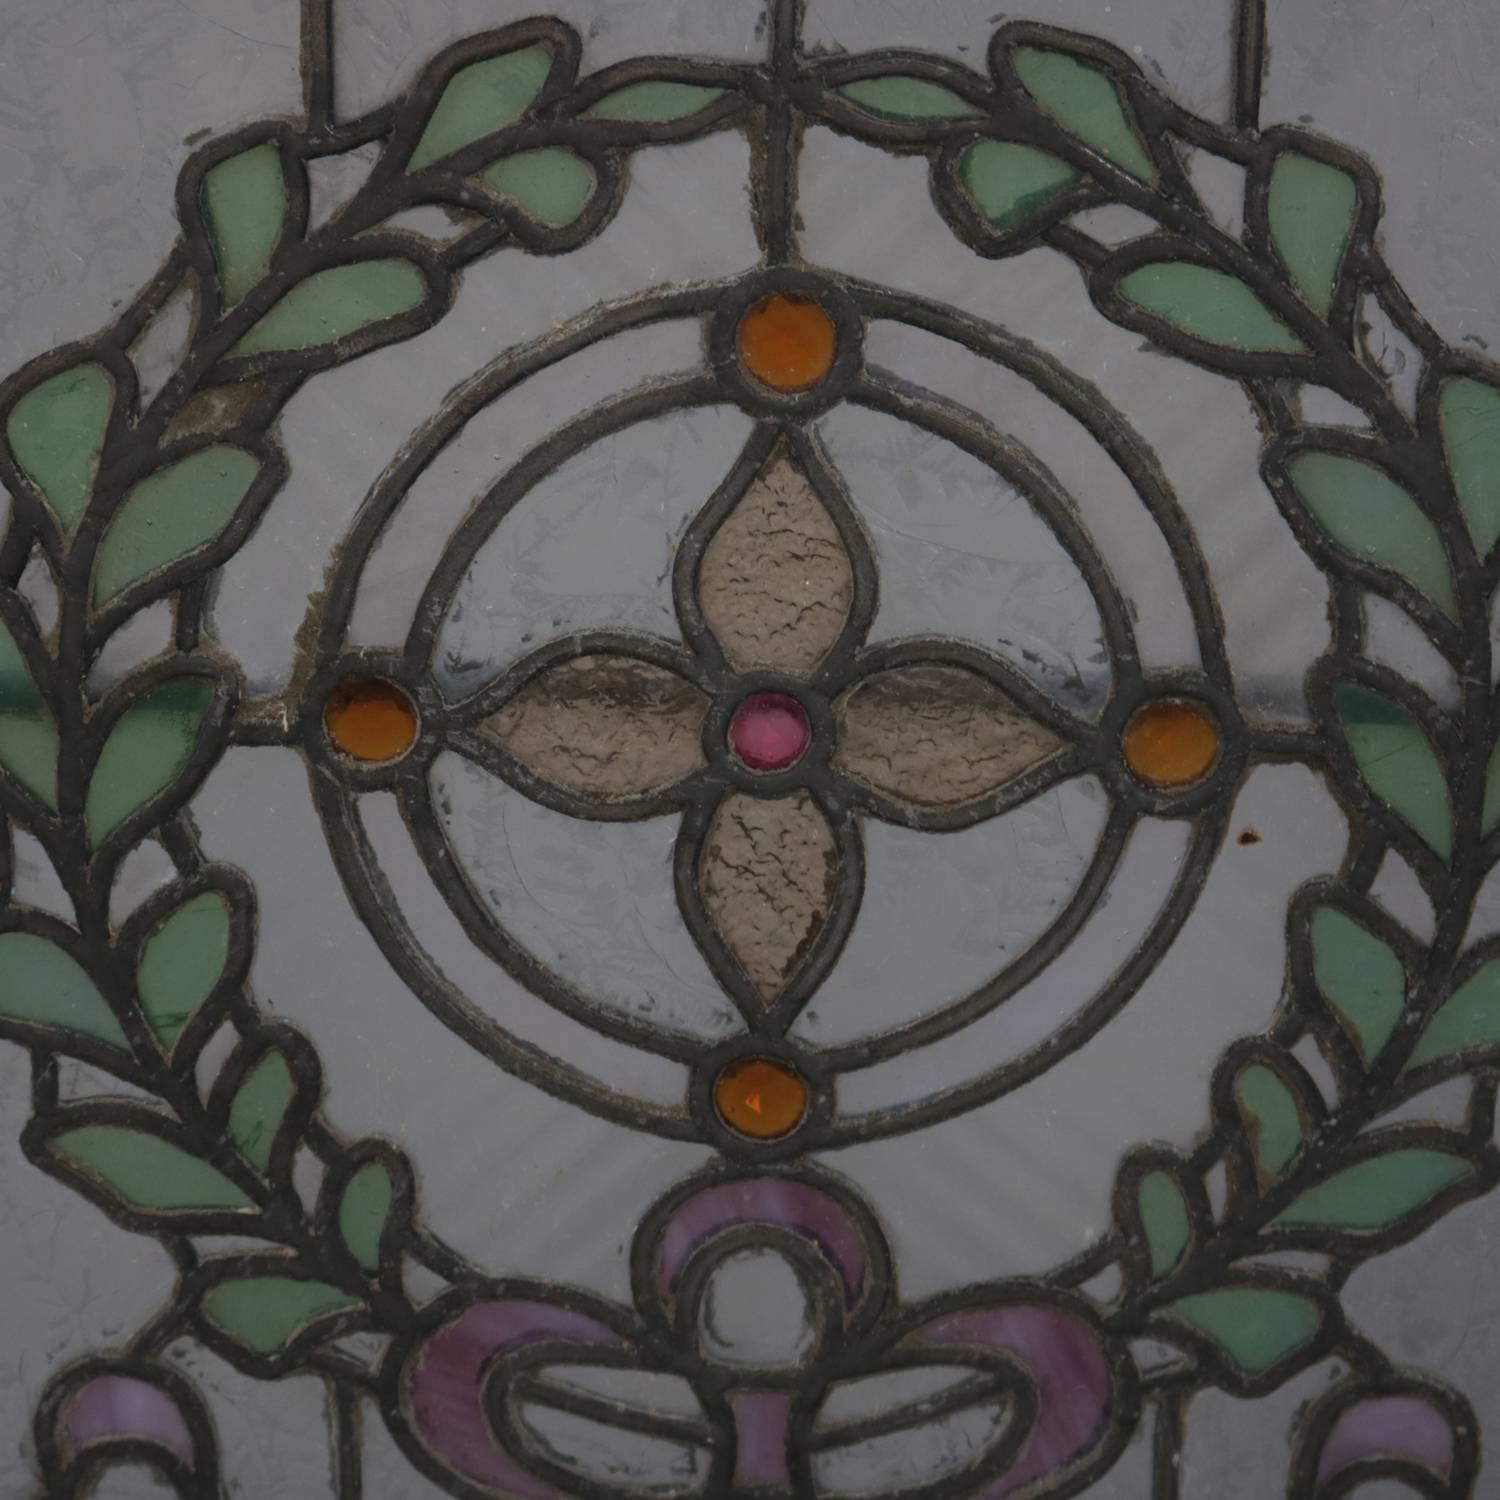 American Architectural Leaded Stained & Jewelled Glass Window, Laurel Wreath, circa 1880